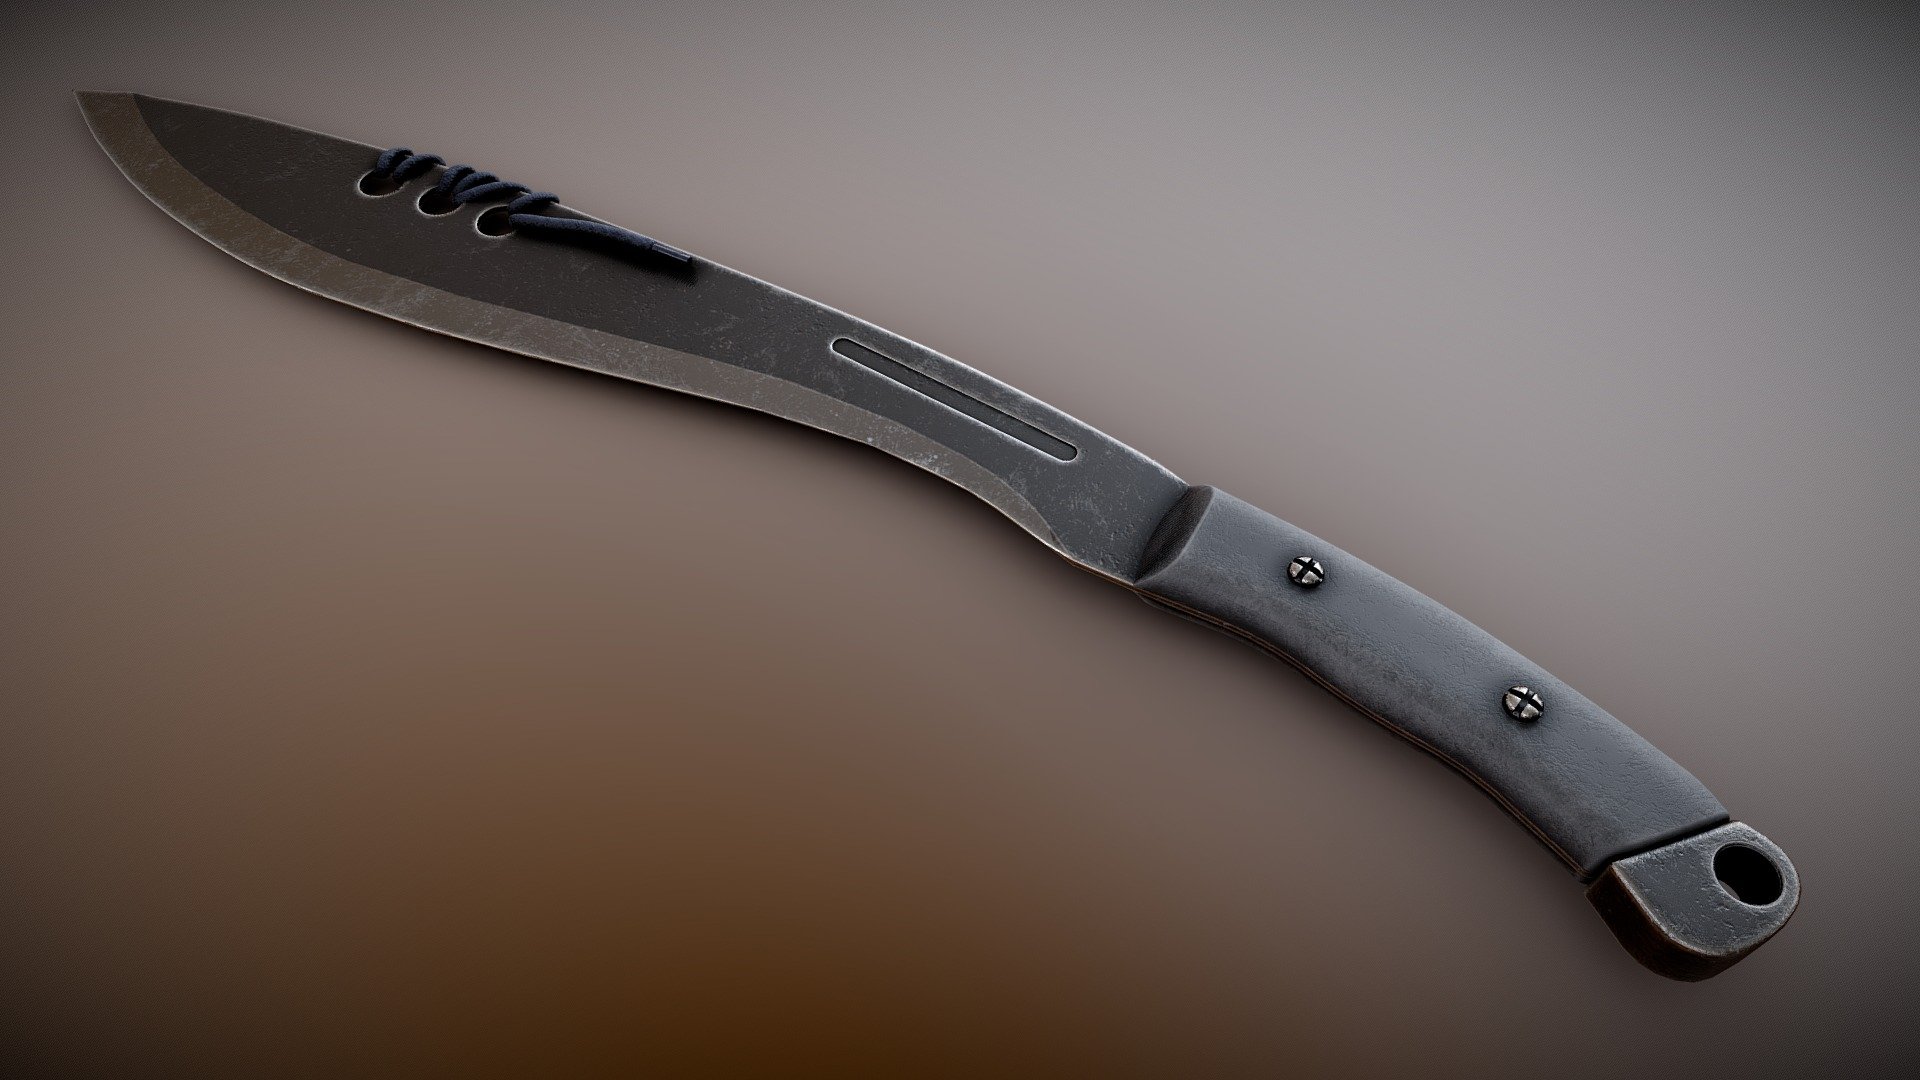 It's a Shoelace Machete! From Dying Light 2.
Will be made into a mod for the VR game Blade &amp; Sorcery 3d model